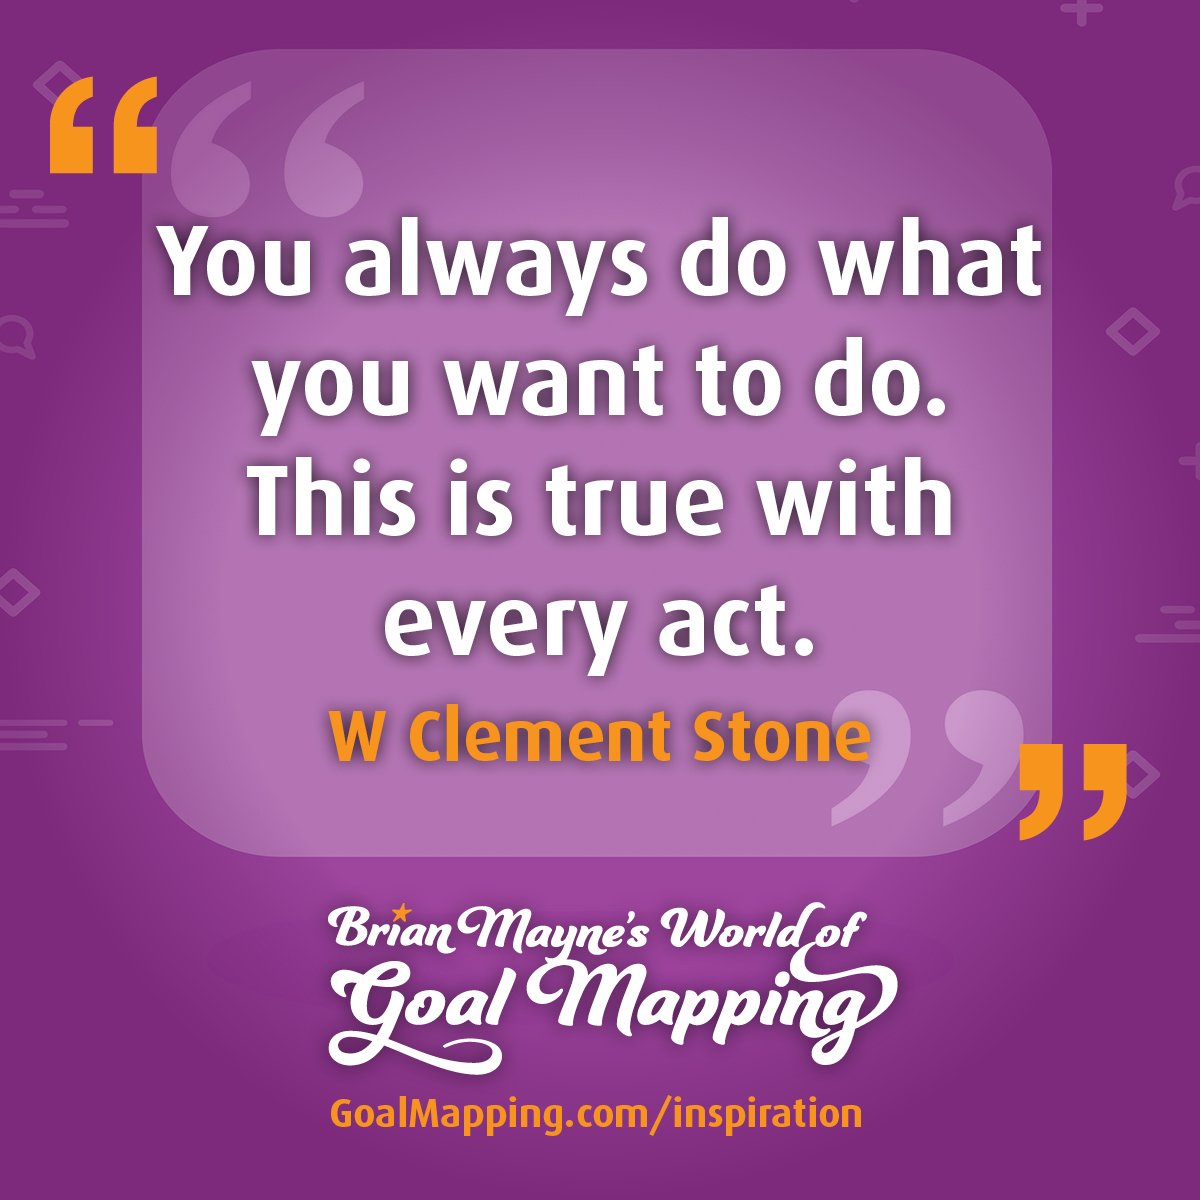 "You always do what you want to do. This is true with every act." W Clement Stone